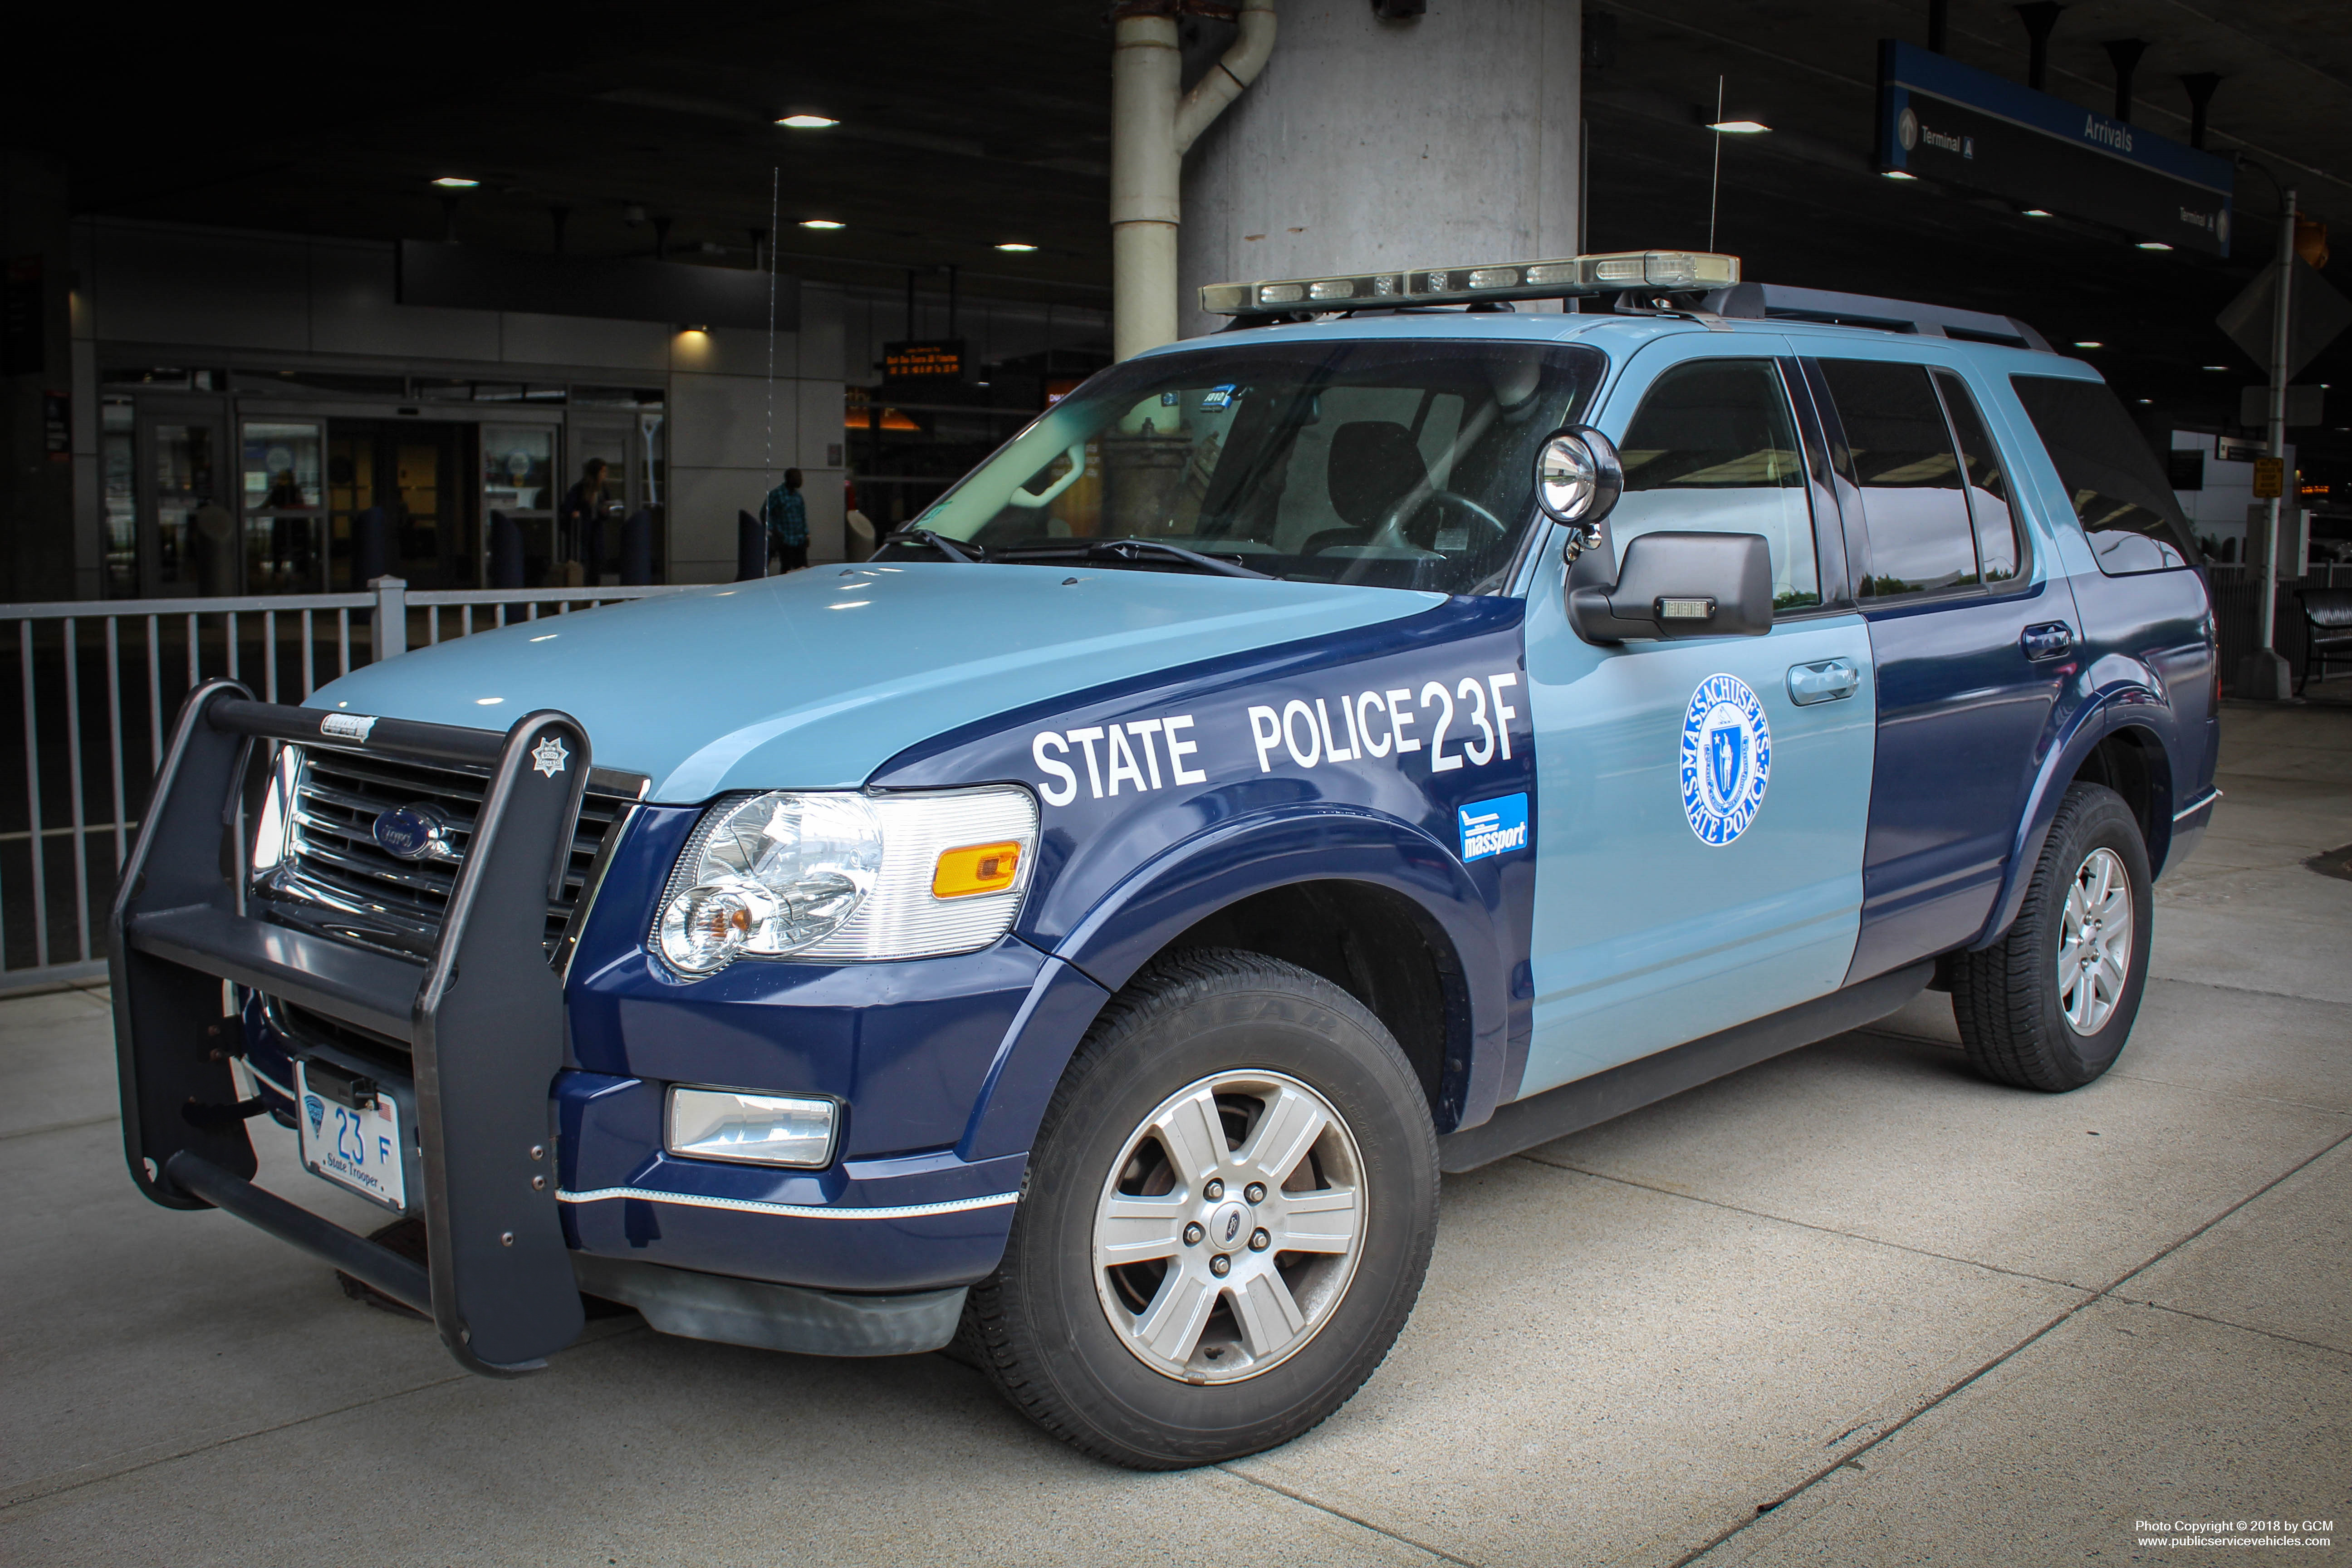 A photo  of Massachusetts State Police
            Cruiser 23F, a 2010 Ford Explorer XLT             taken by Corey Gillet